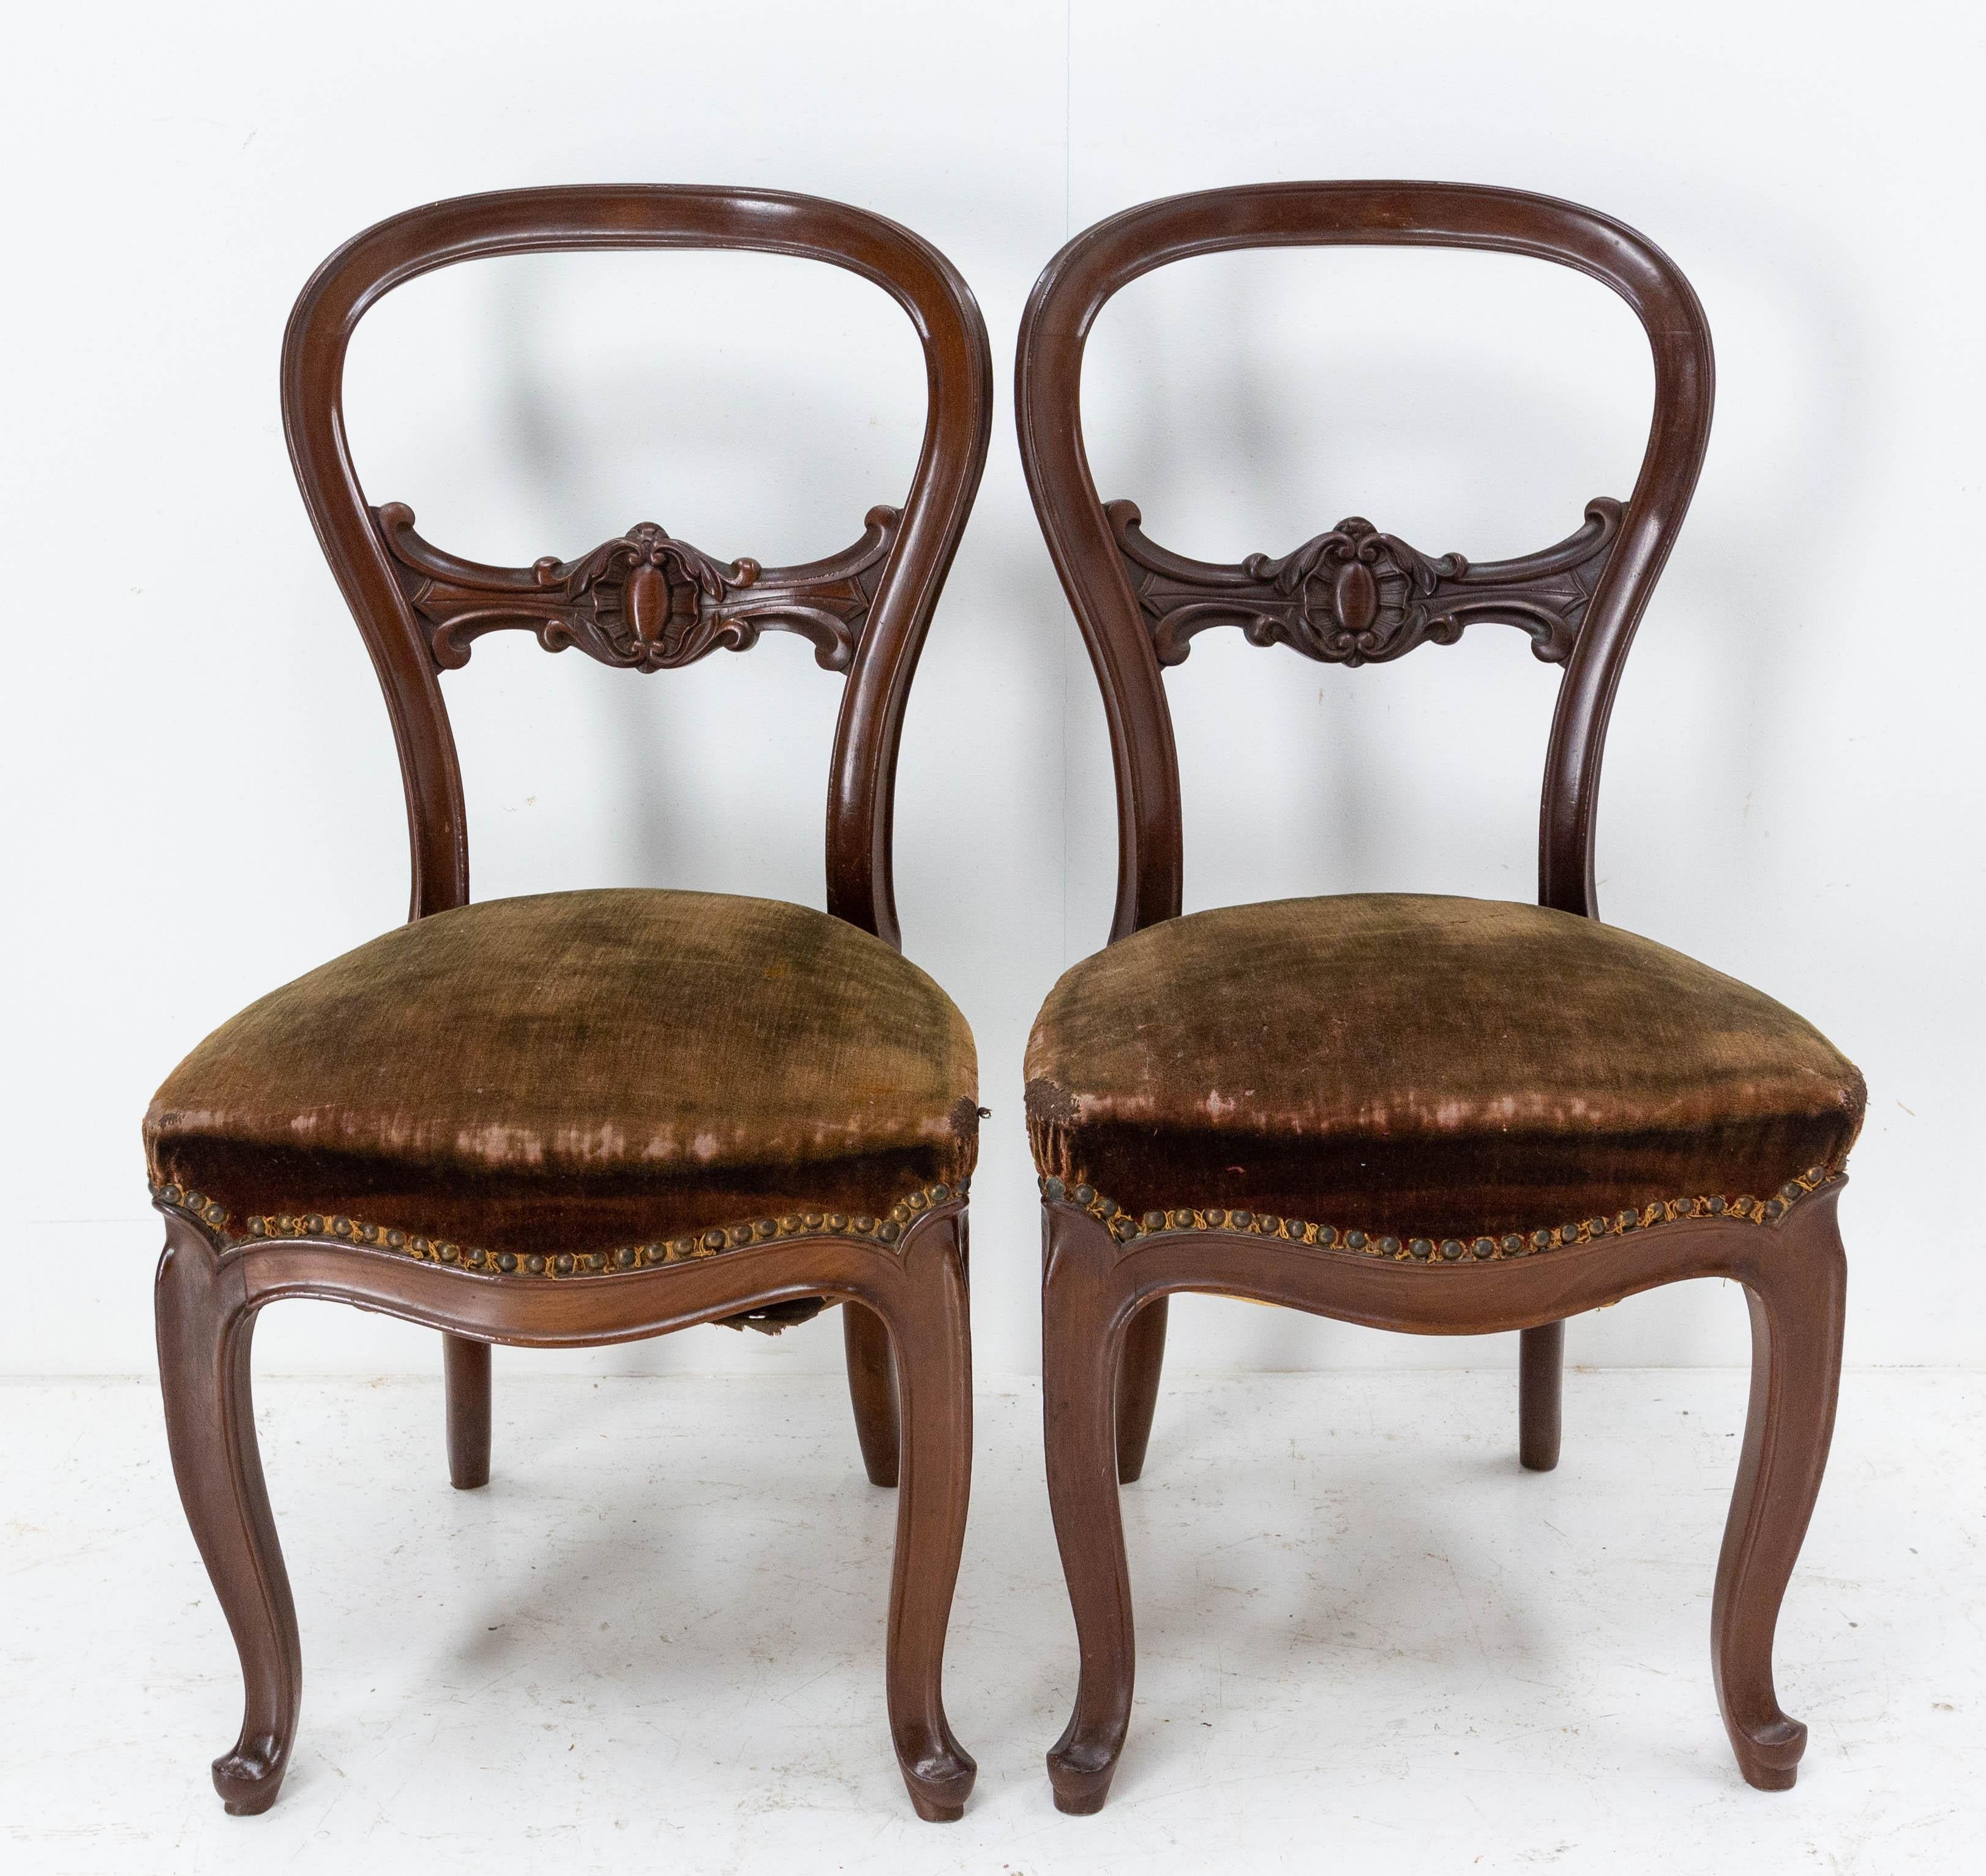 Napoleon III French upholstered pair of exotic wood and velvet chairs late 19th century.
The backs are very finely sliced.
The chairs can be used as it stands for more authenticity but the velvet can be recovered to suit your